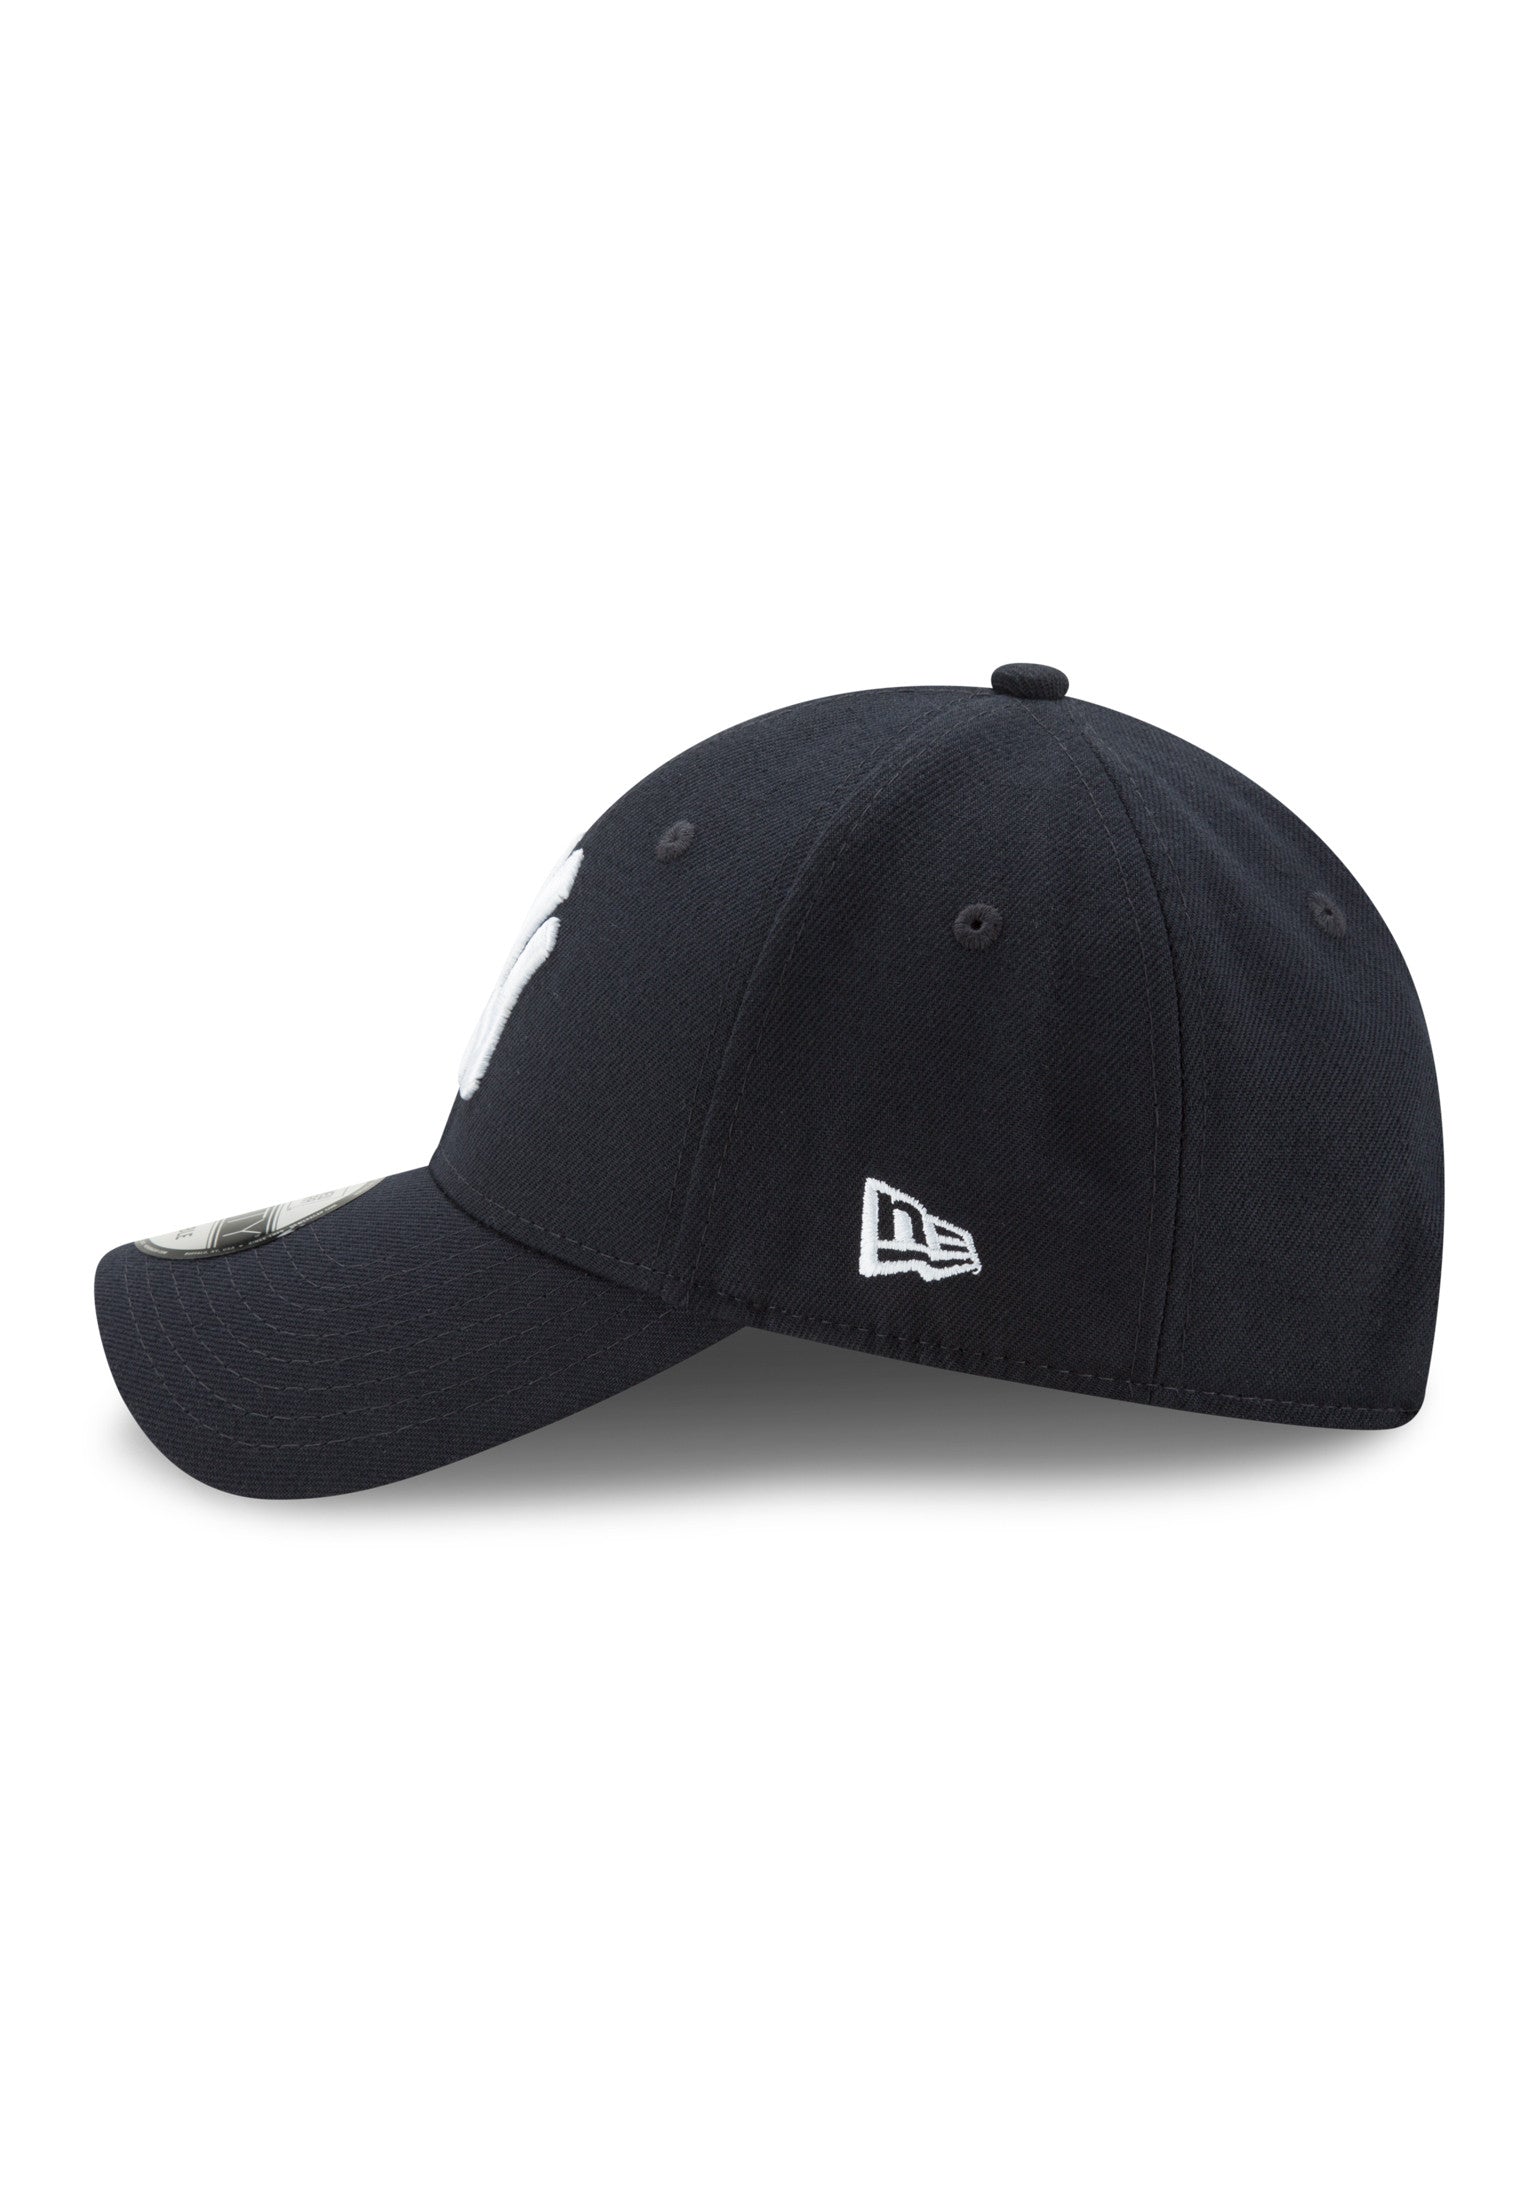 New York Yankees The League 9Forty - Navy - Headz Up 